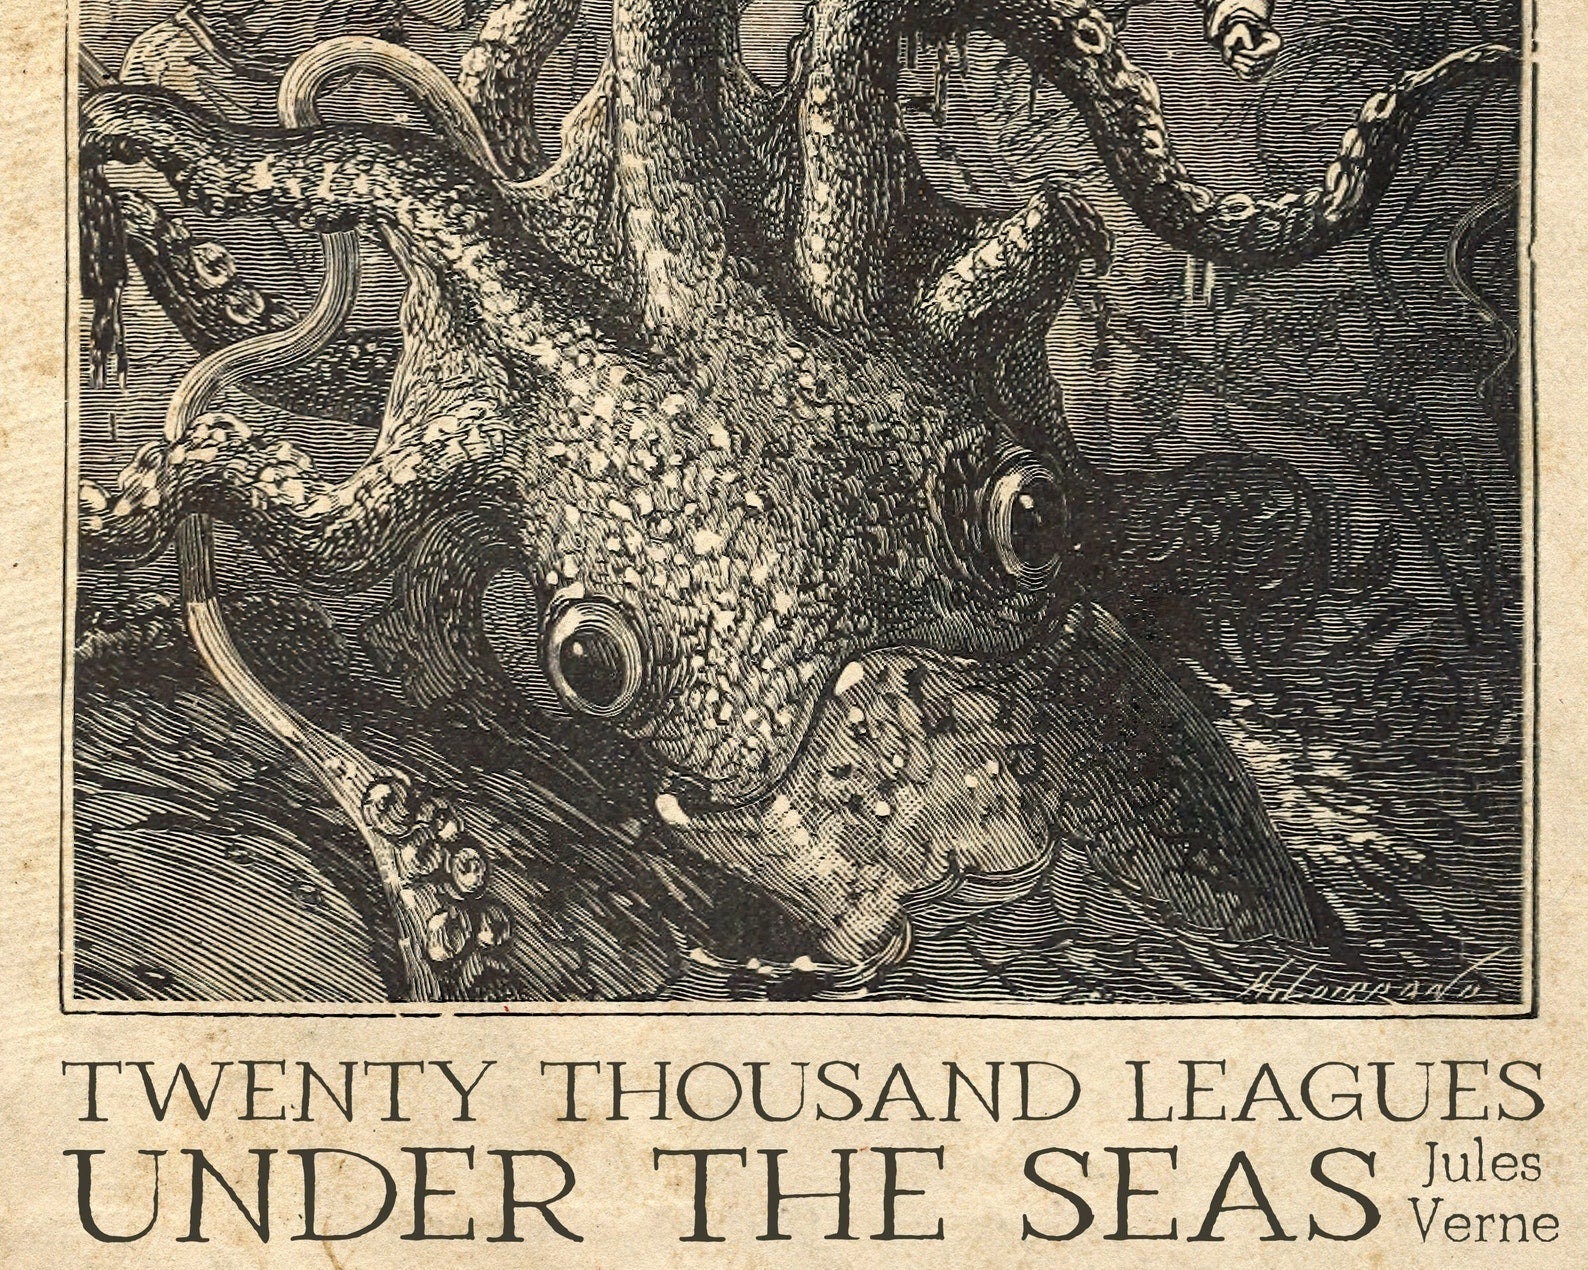 Édouard Riou "The Squid and His Victim" from Twenty Thousand Leagues Under the Seas (Jules Verne) - Mabon Gallery